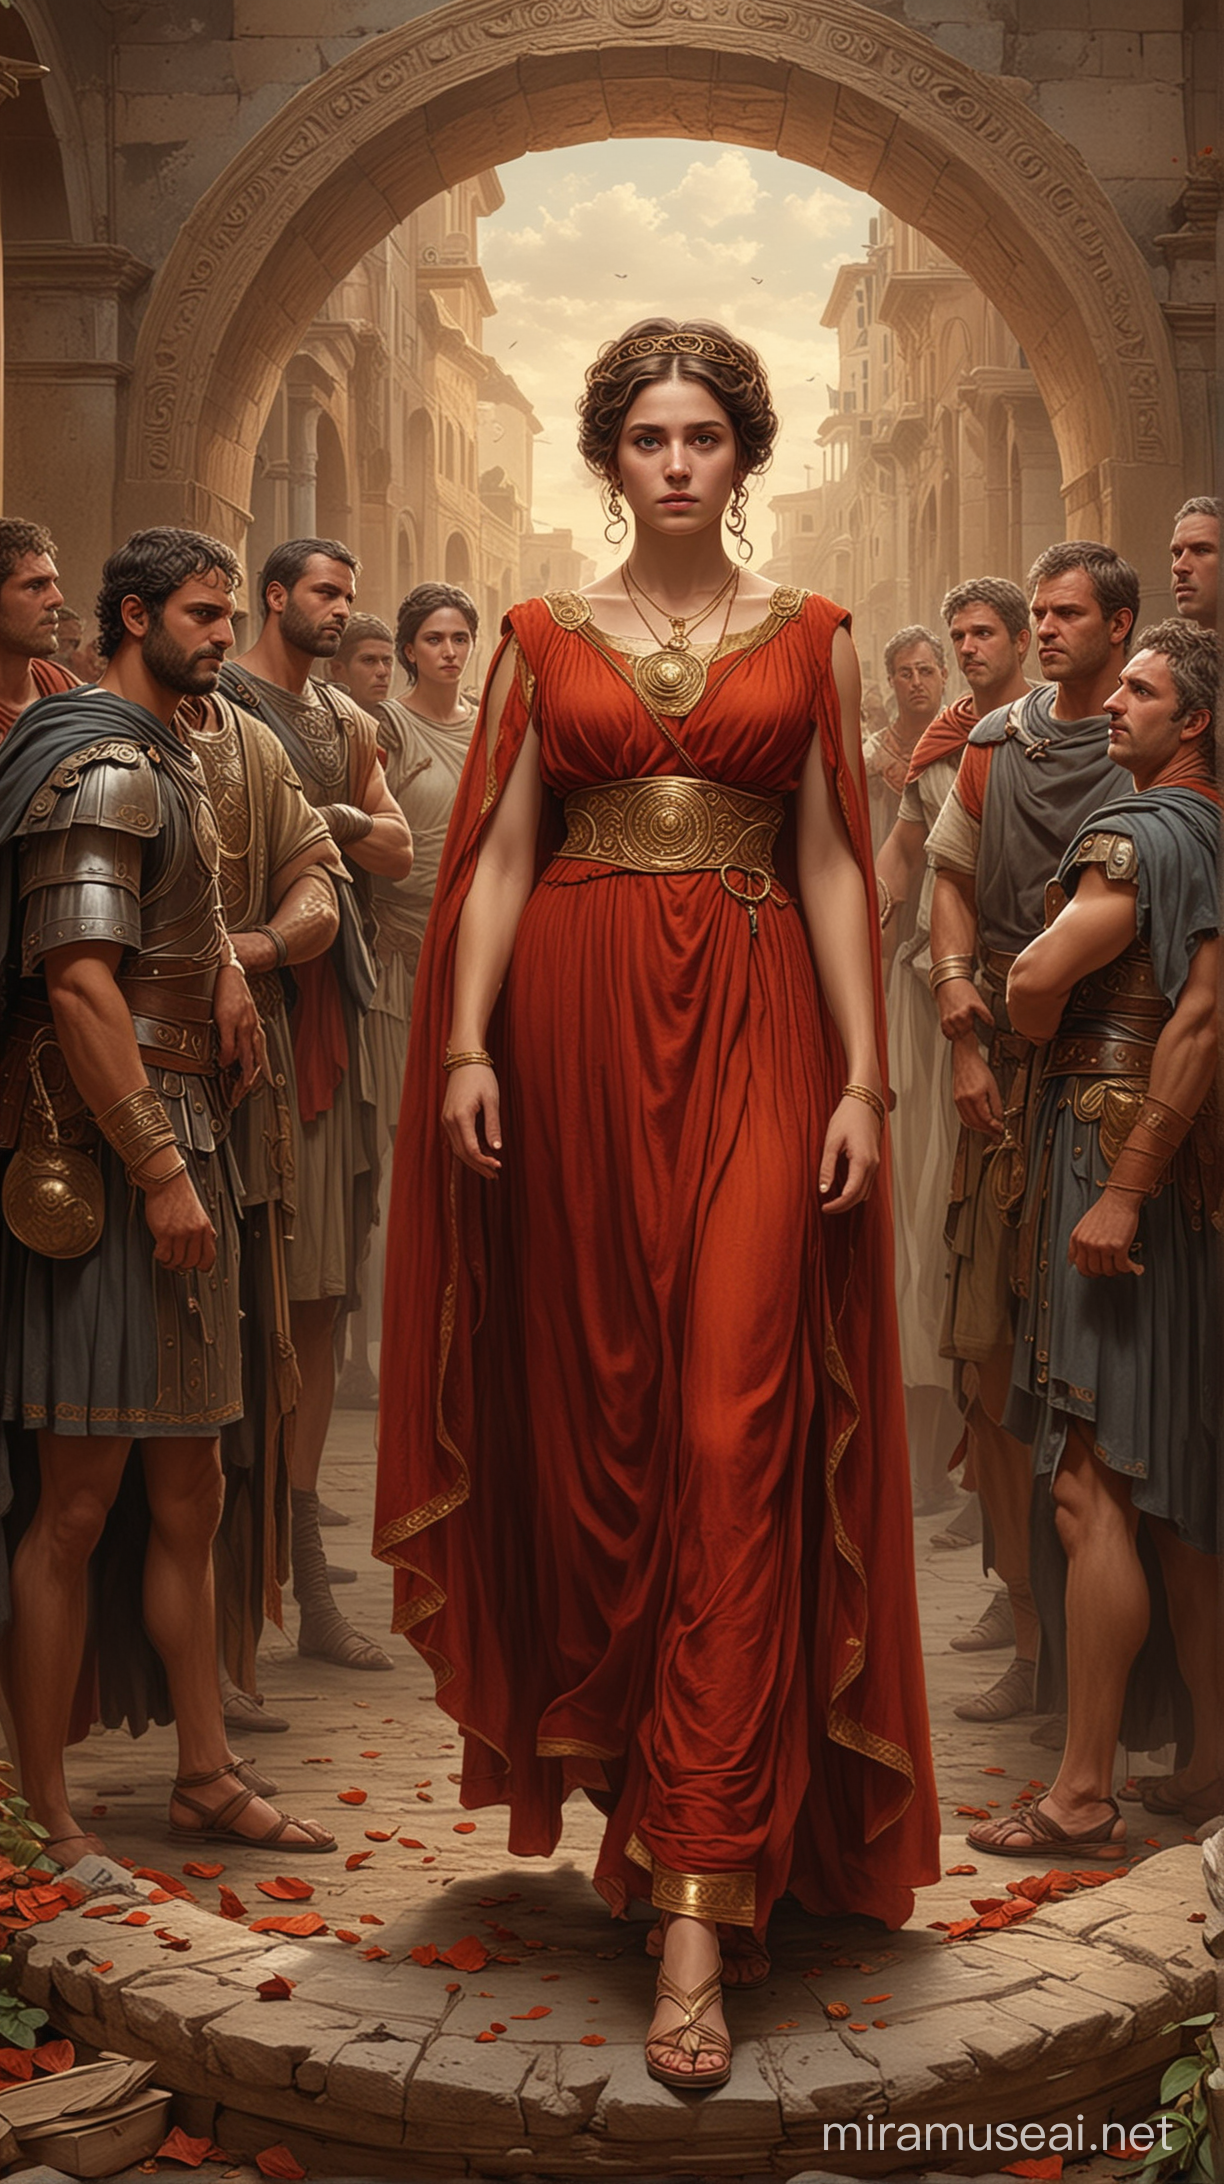 Illustrate a scene from ancient Rome featuring (((Julia))), a young woman clad in regal garb, surrounded by a circle of (((influential men))) who share a complex, intricate relationship in a moody background